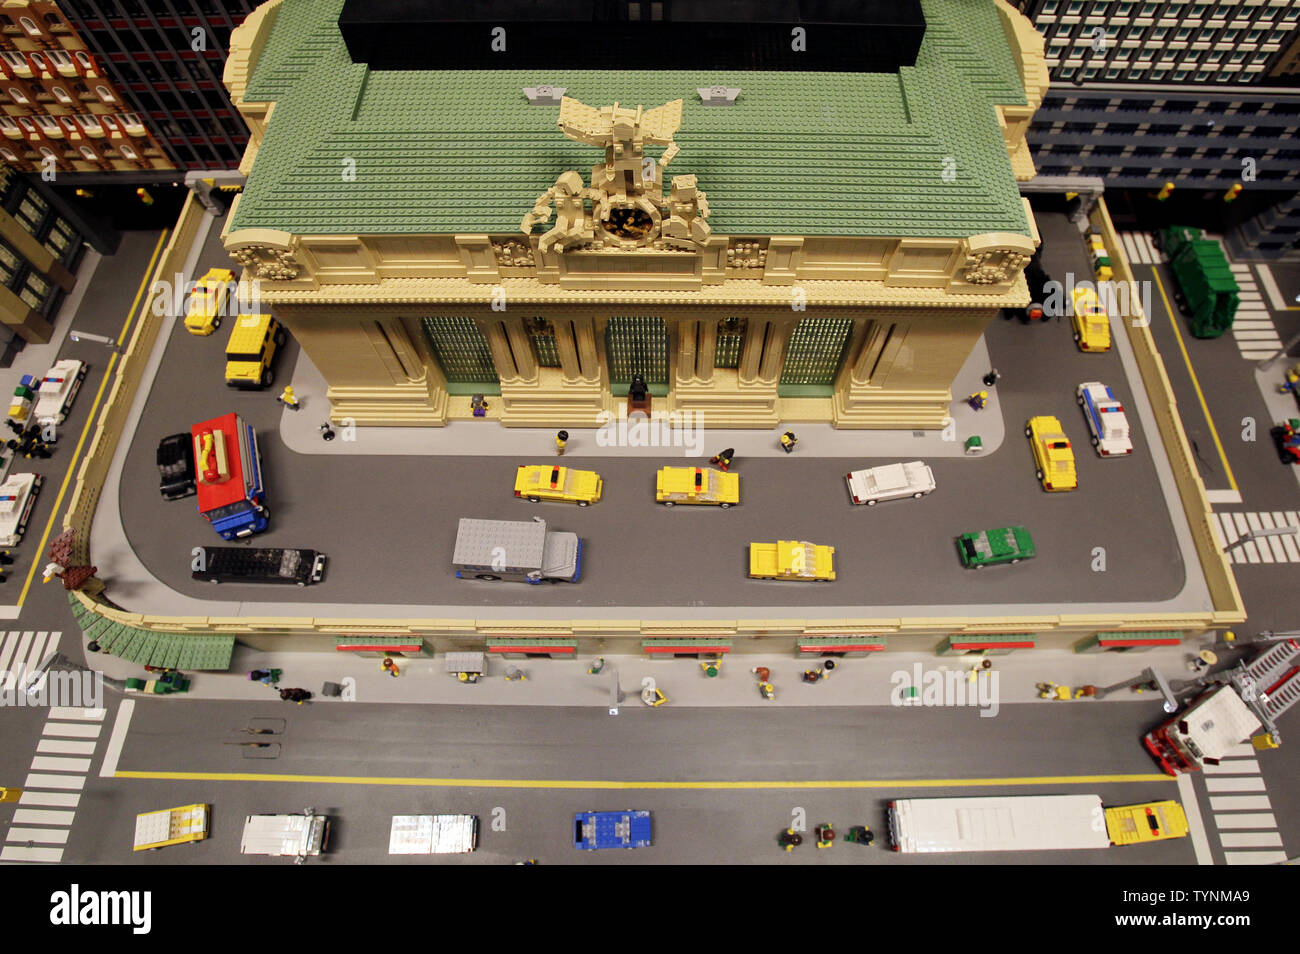 Enhed vil beslutte Minimer A model of Grand Central Station built in LEGO pieces is surrounded by  other New York City landmarks after an intricately detailed 12 foot-tall  model of One World Trade Center built out